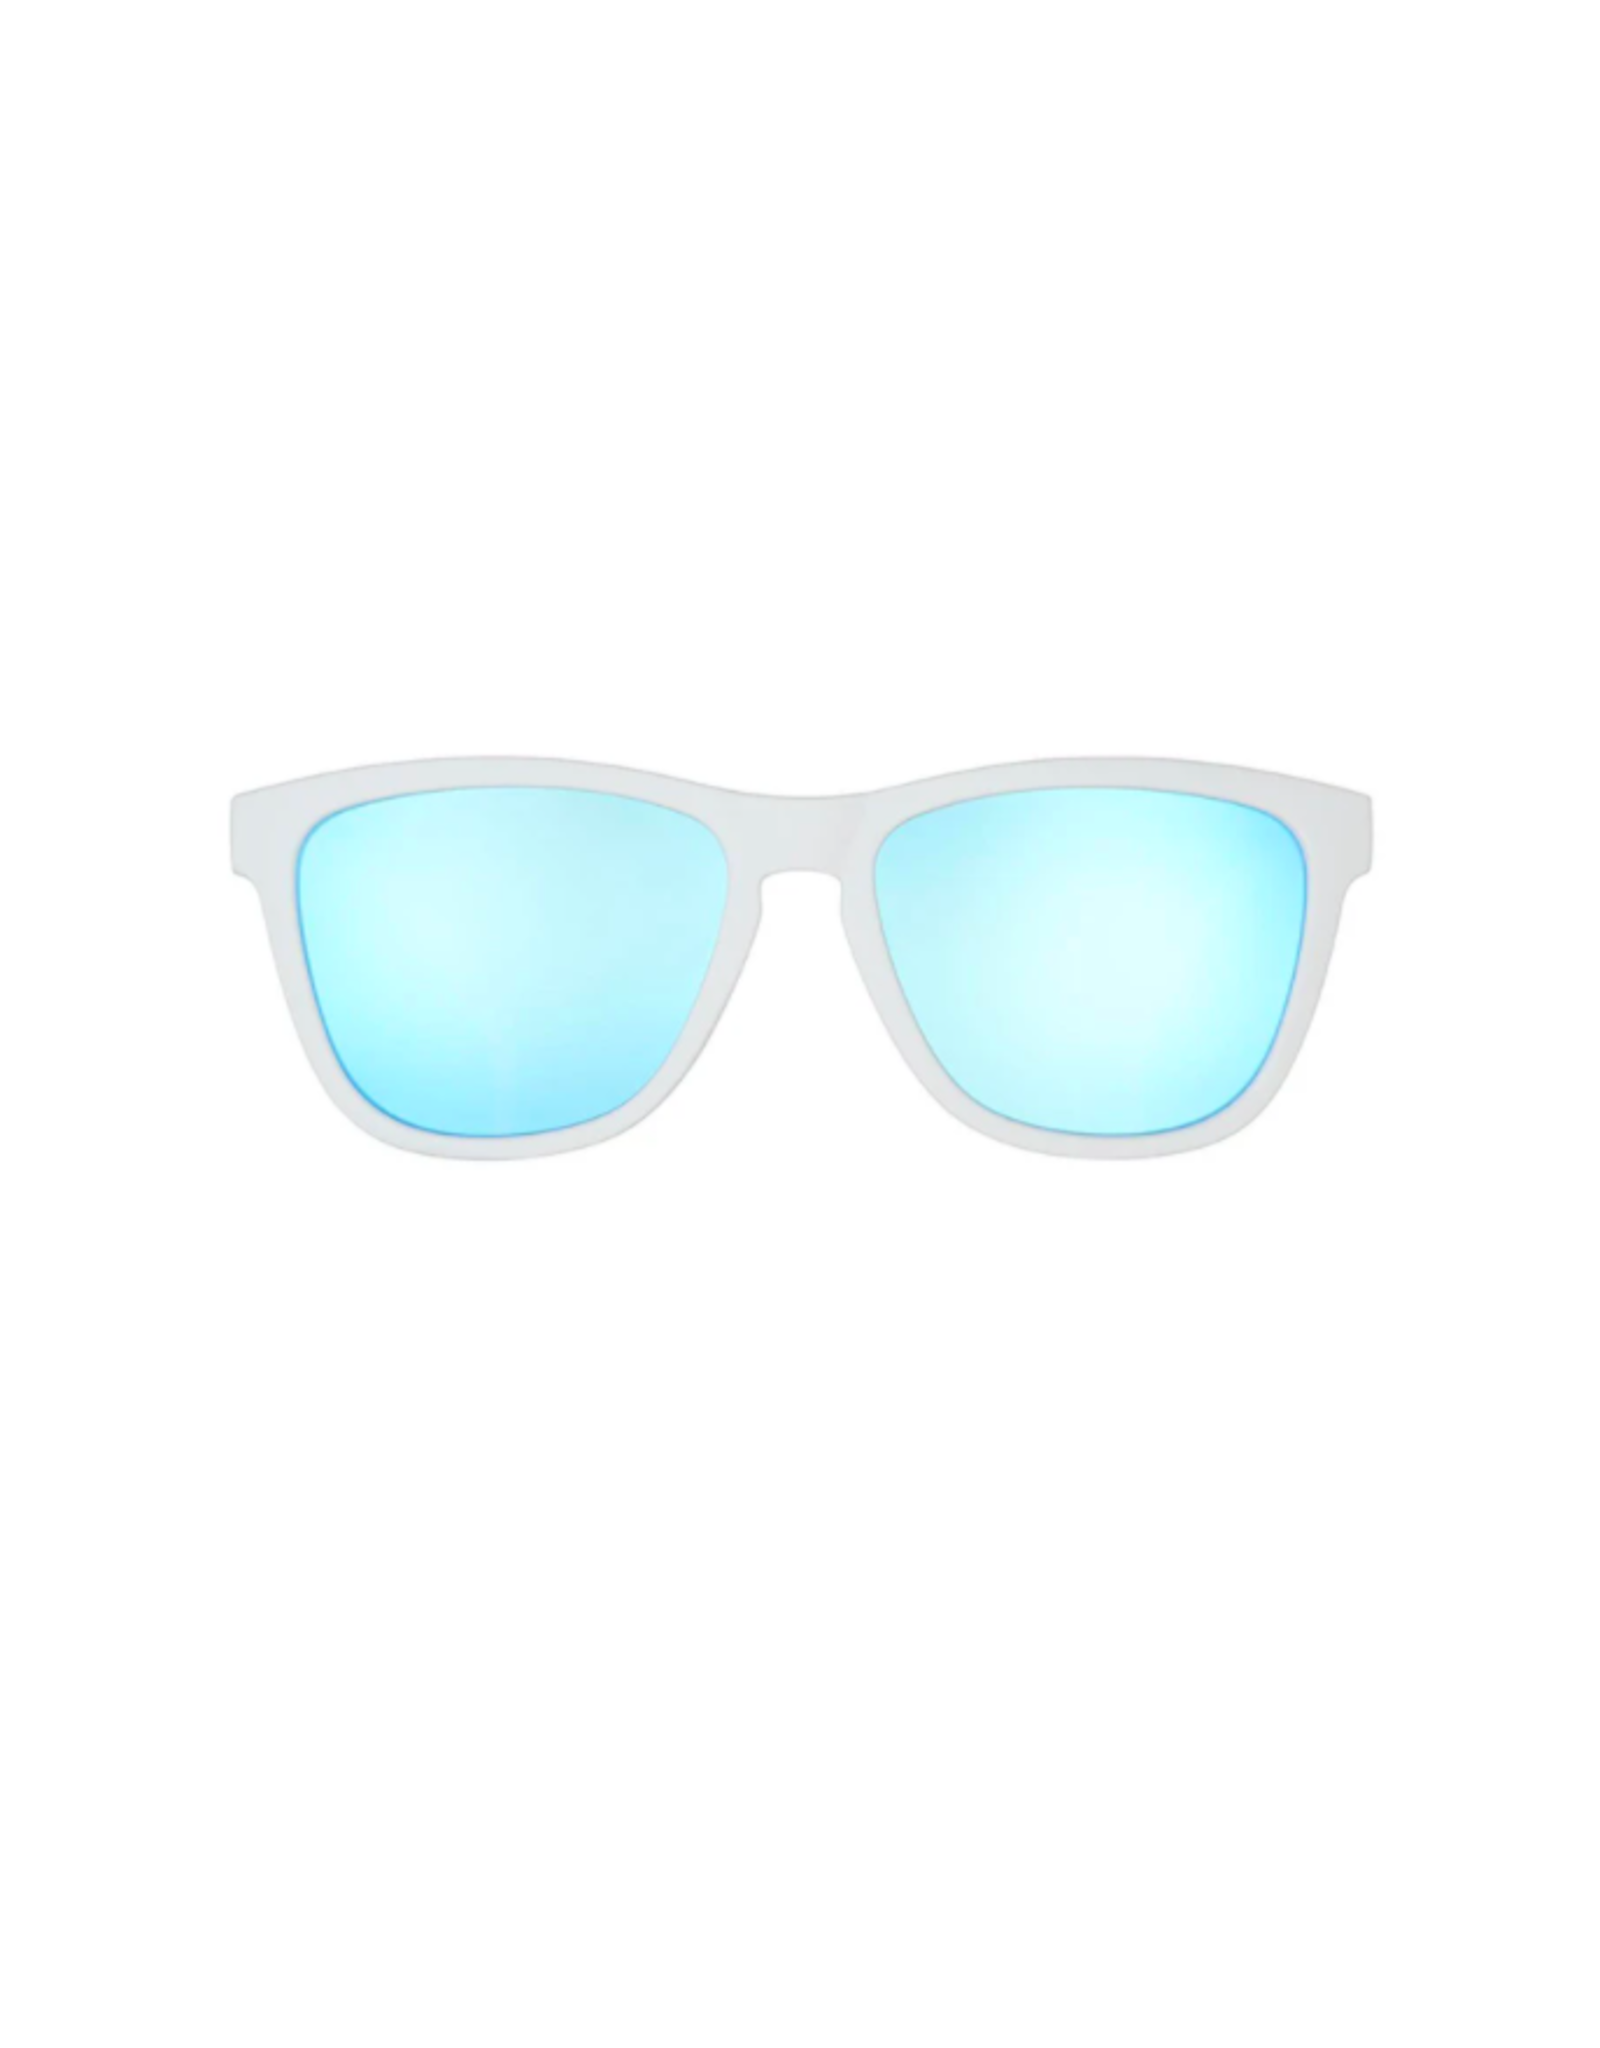 goodr Iced by Yetis Sunglasses by goodr